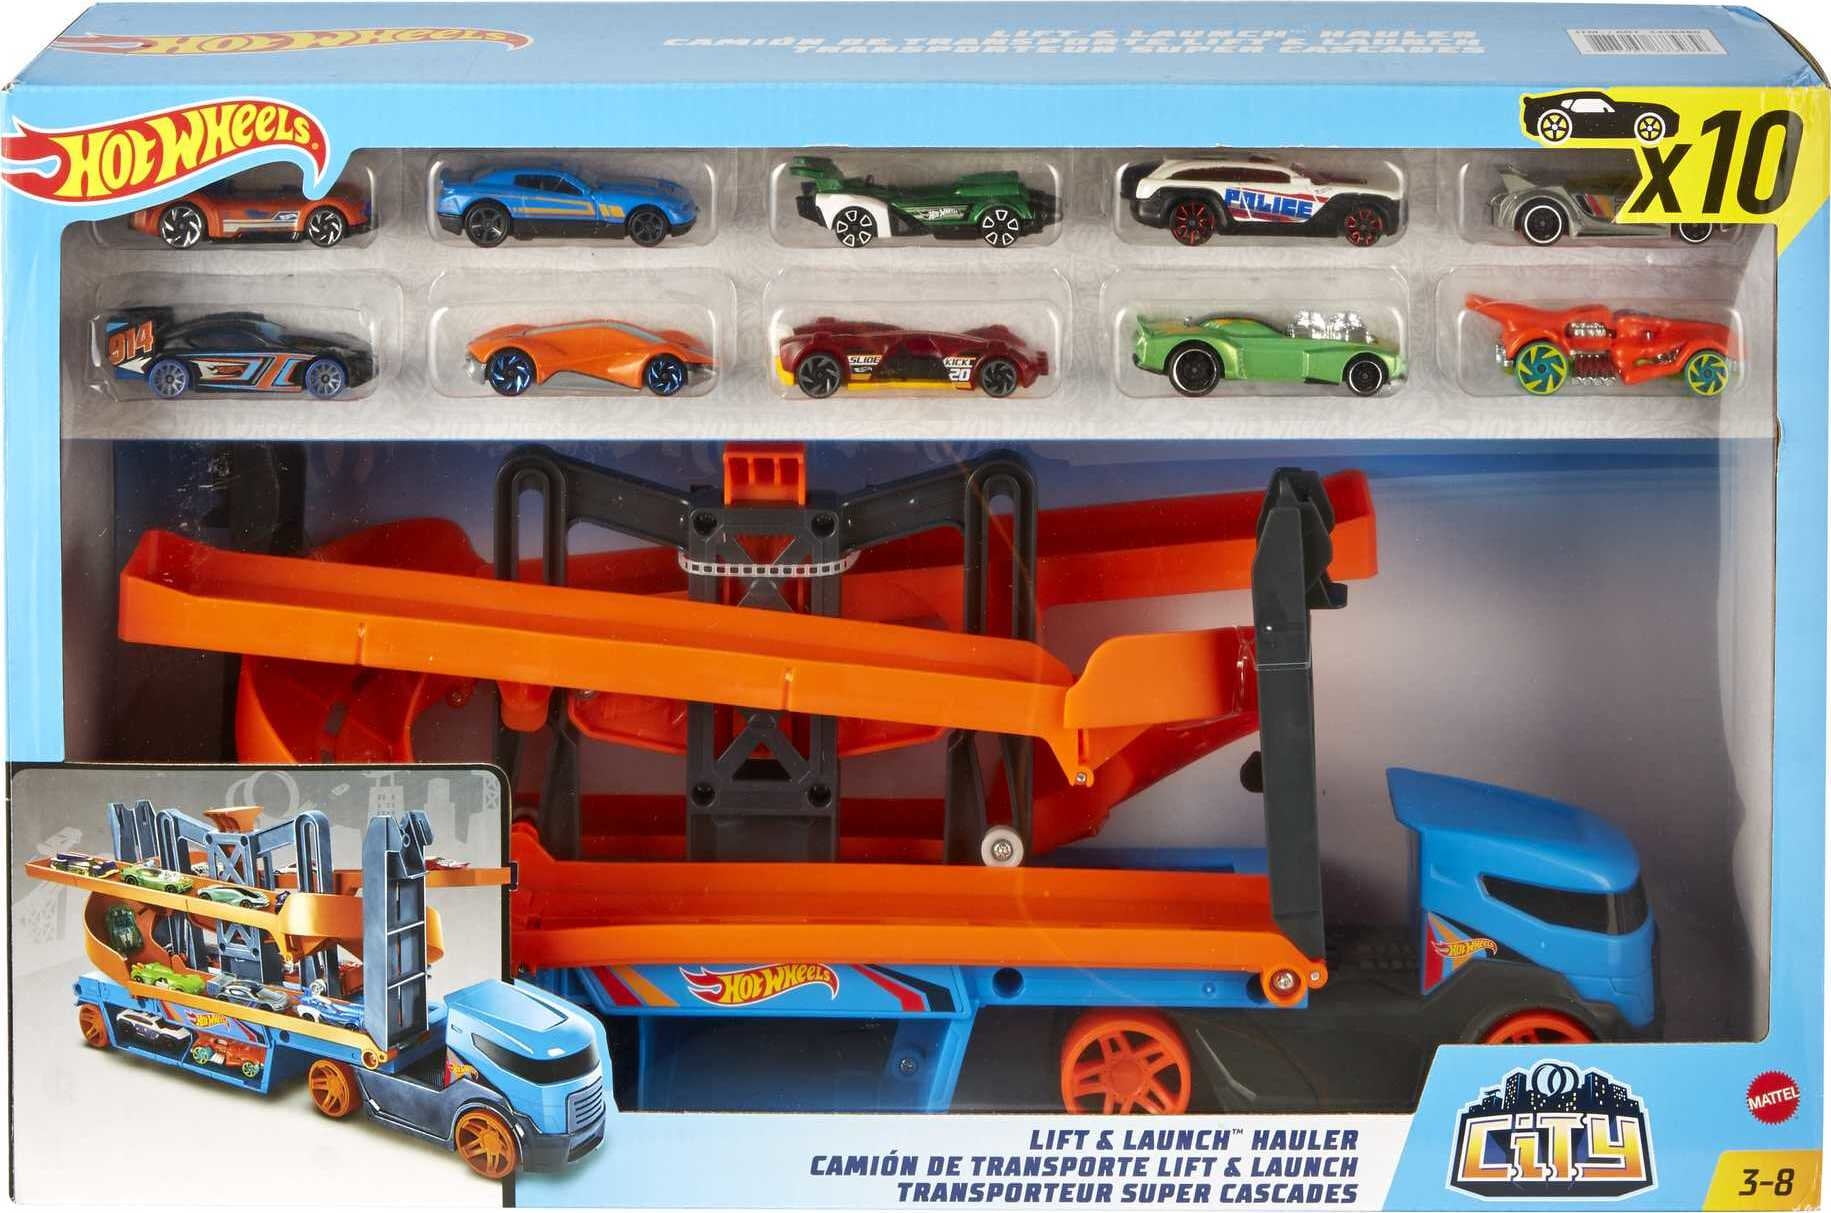 Hot Wheels Lift & Hauler Toy Truck with 10 Cars 1:64 Scale, Transporter Stores 20 Vehicles - Walmart.com